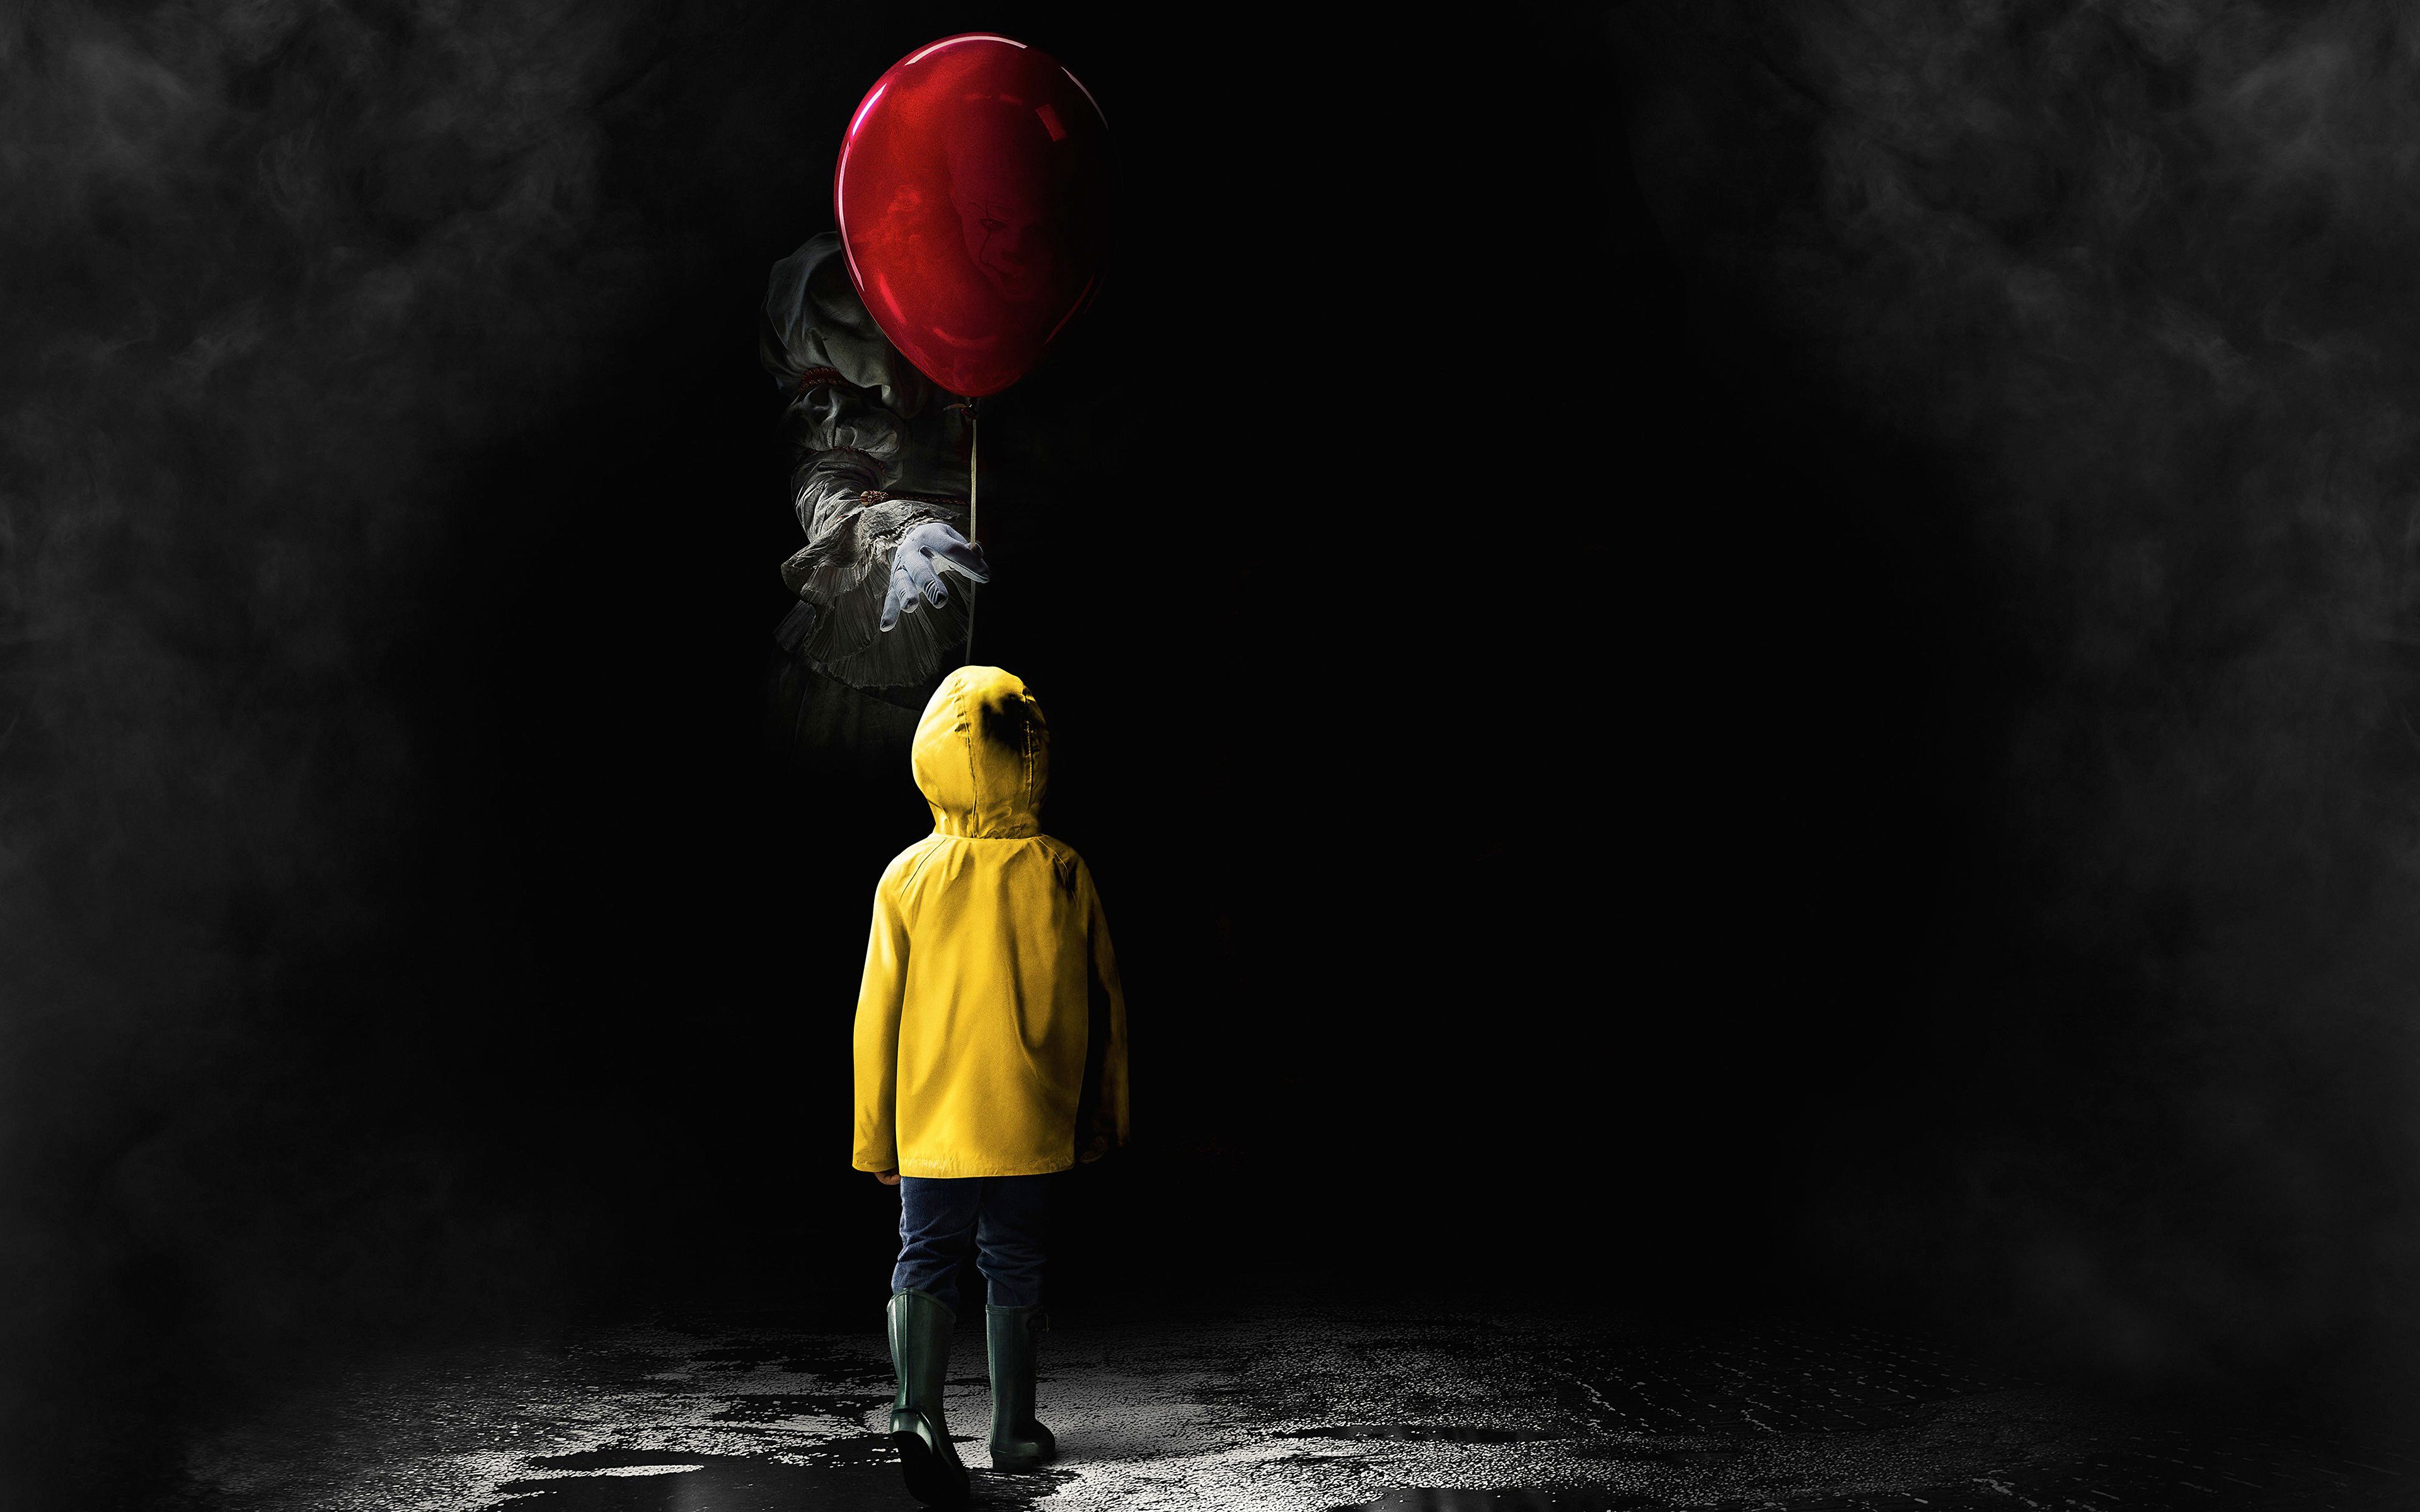 It 2017 Movie 4k, HD Movies, 4k Wallpaper, Image, Background, Photo and Picture. Movie, Film, Cinema, Drama, Serial, TV, Book Synopsis